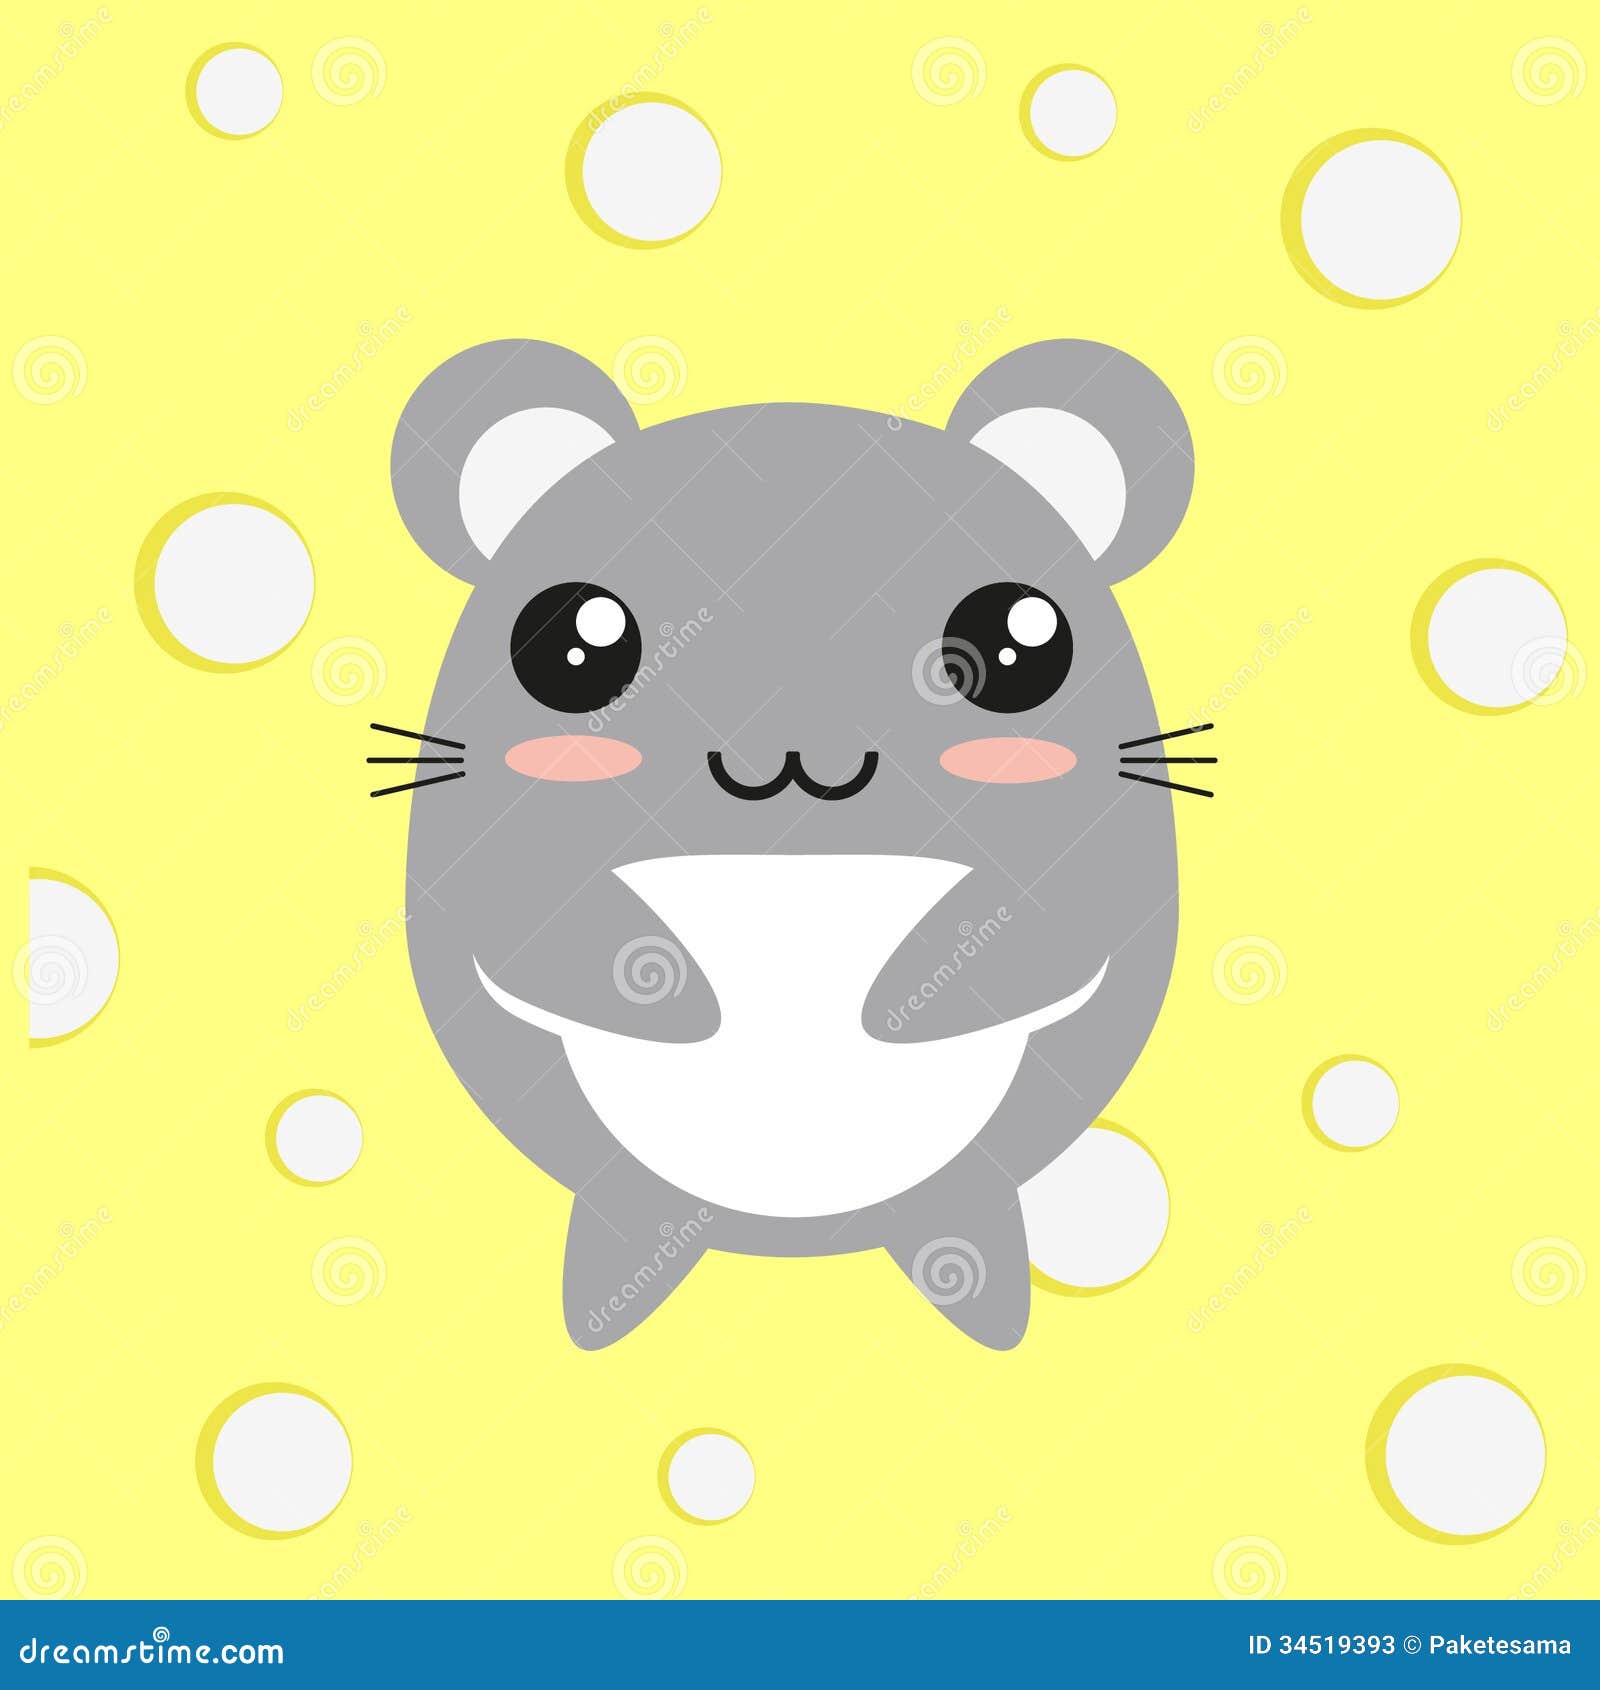 Mouse cartoon character stock vector. Illustration of cute - 34519393